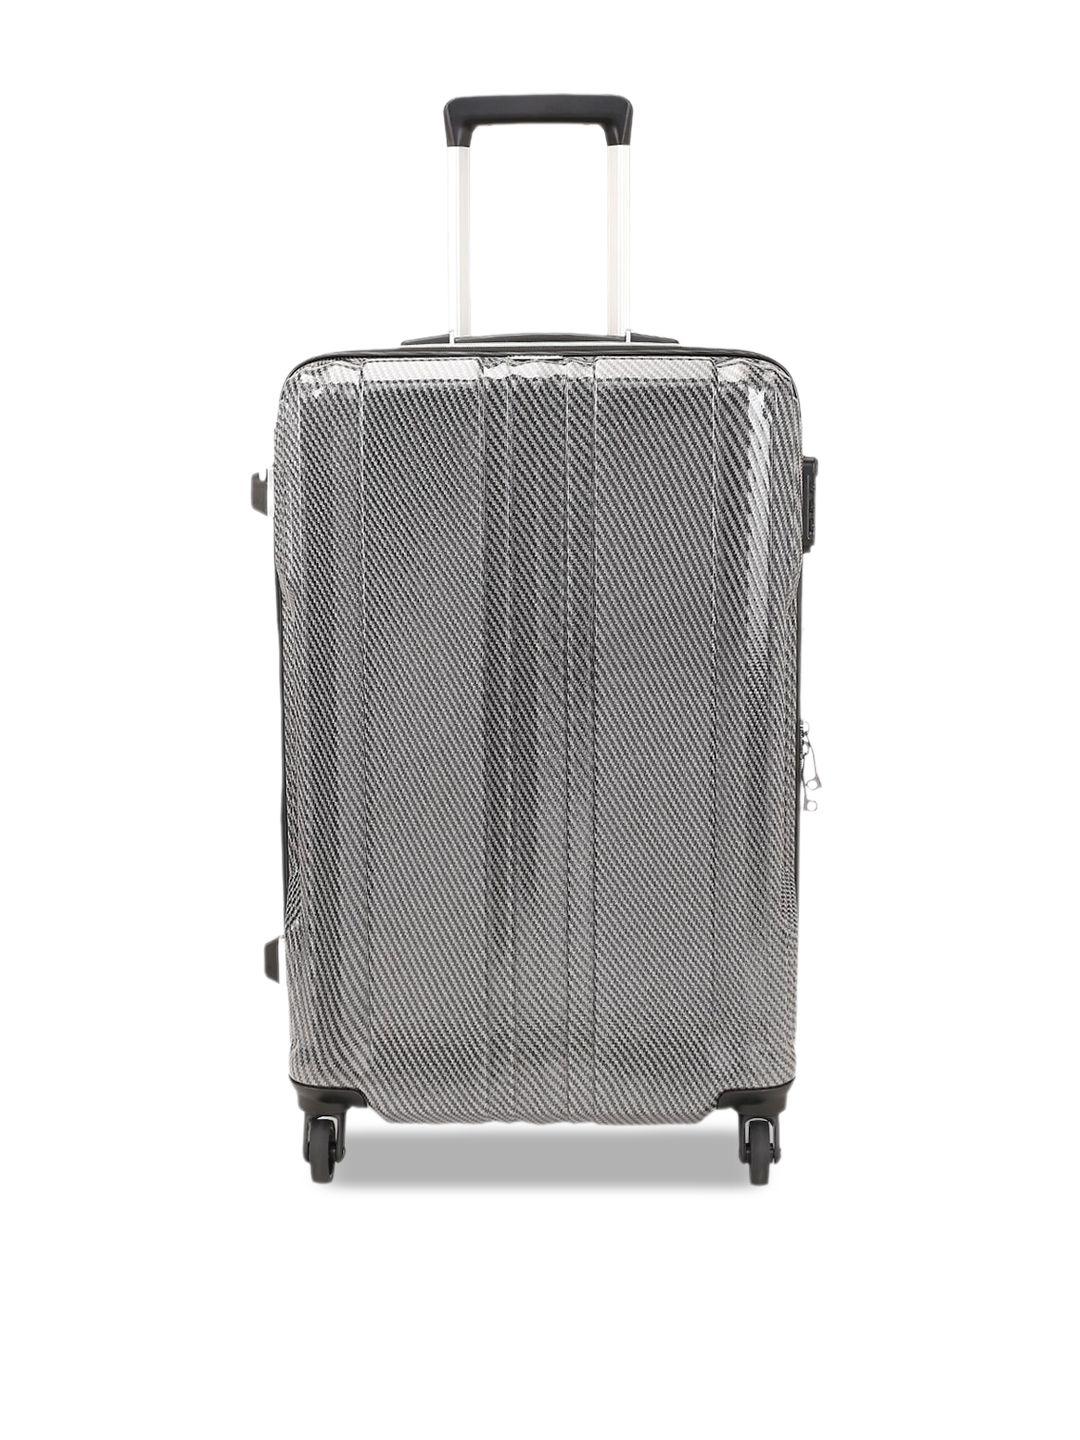 perquisite k09 imperial series textured hard shell medium-sized trolley suitcase